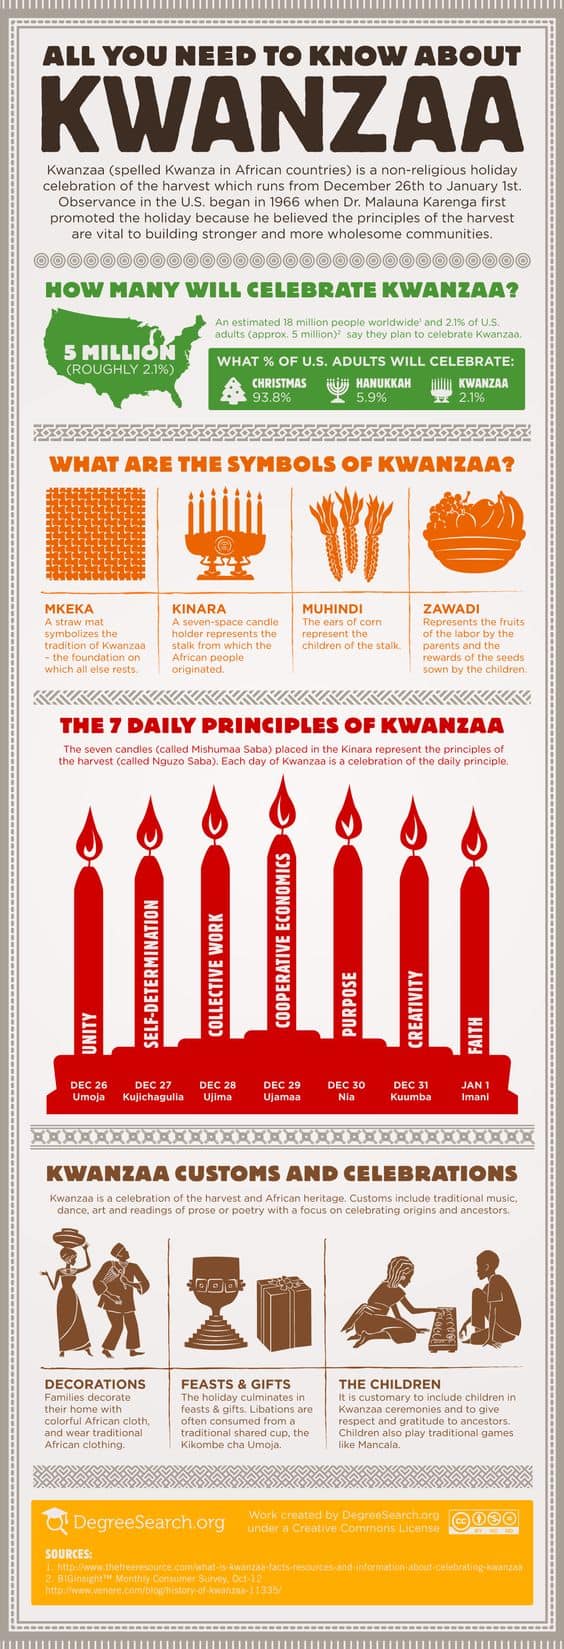 Want to learn more about Kwanzaa, the holiday celebrated from December 26th to January 1st? Read this post to learn about the 7 days of celebration.